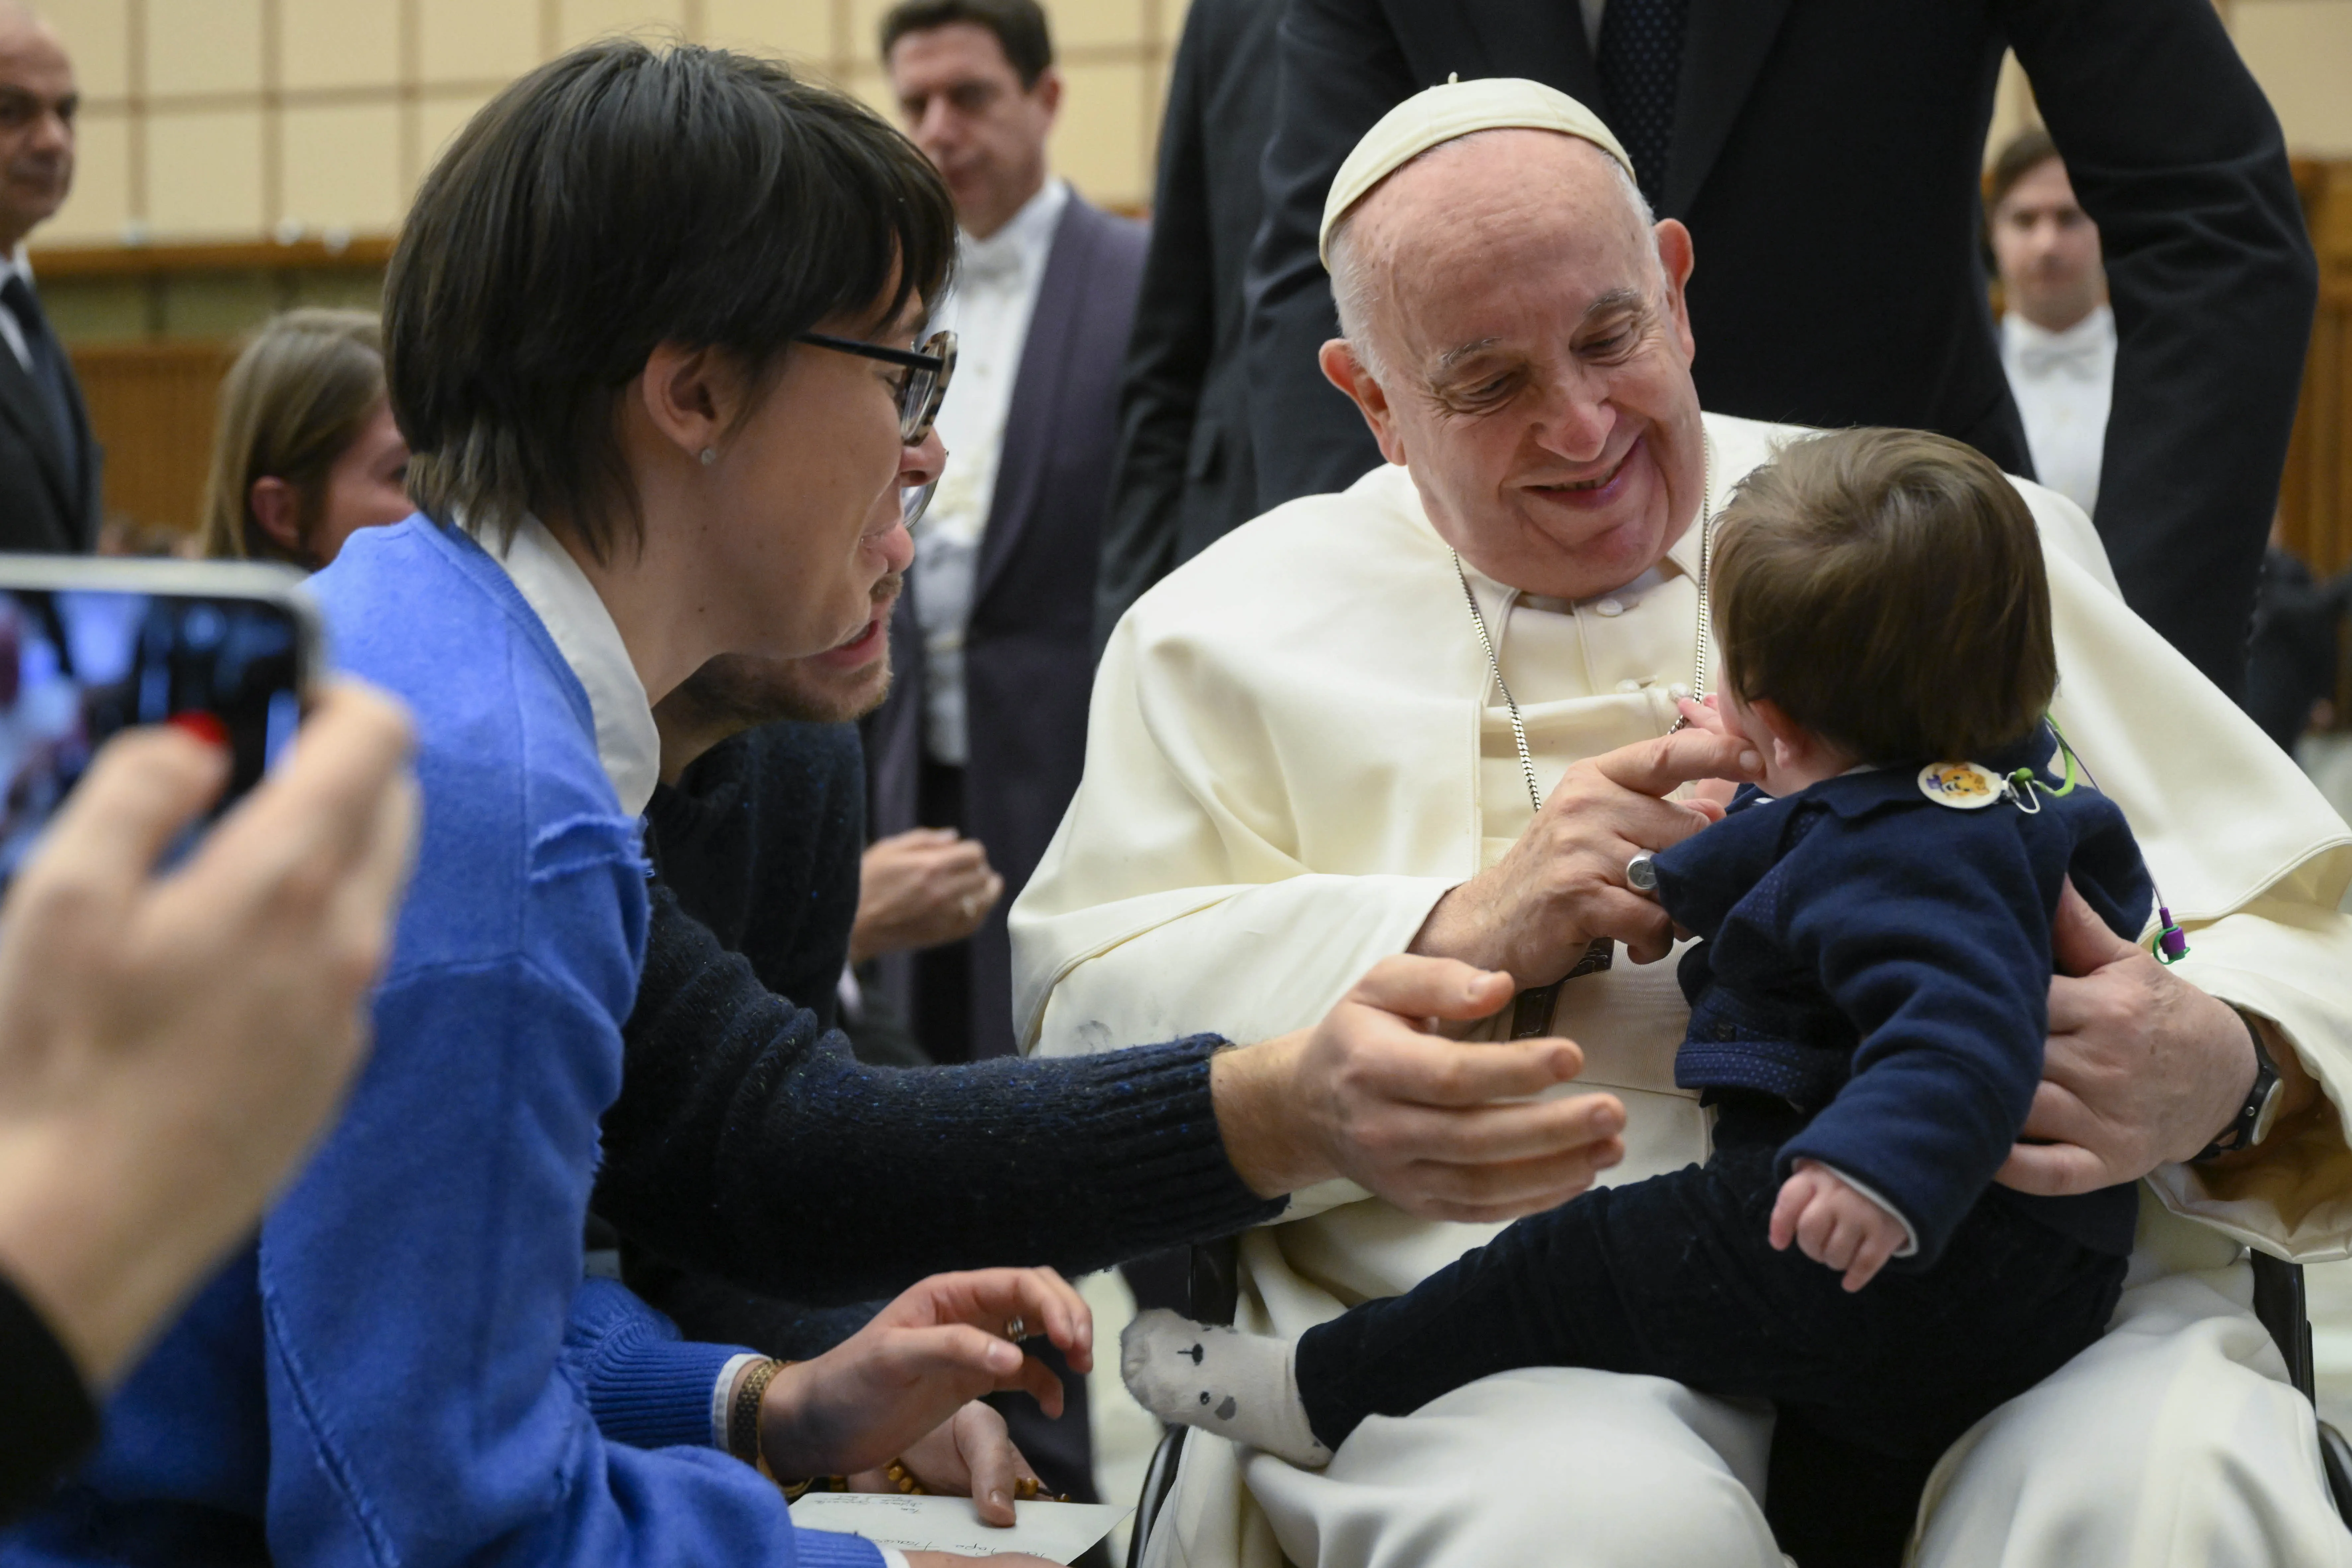 Pope Francis greets pilgrims at his general audience in Paul VI Hall on Jan. 25, 2023.?w=200&h=150